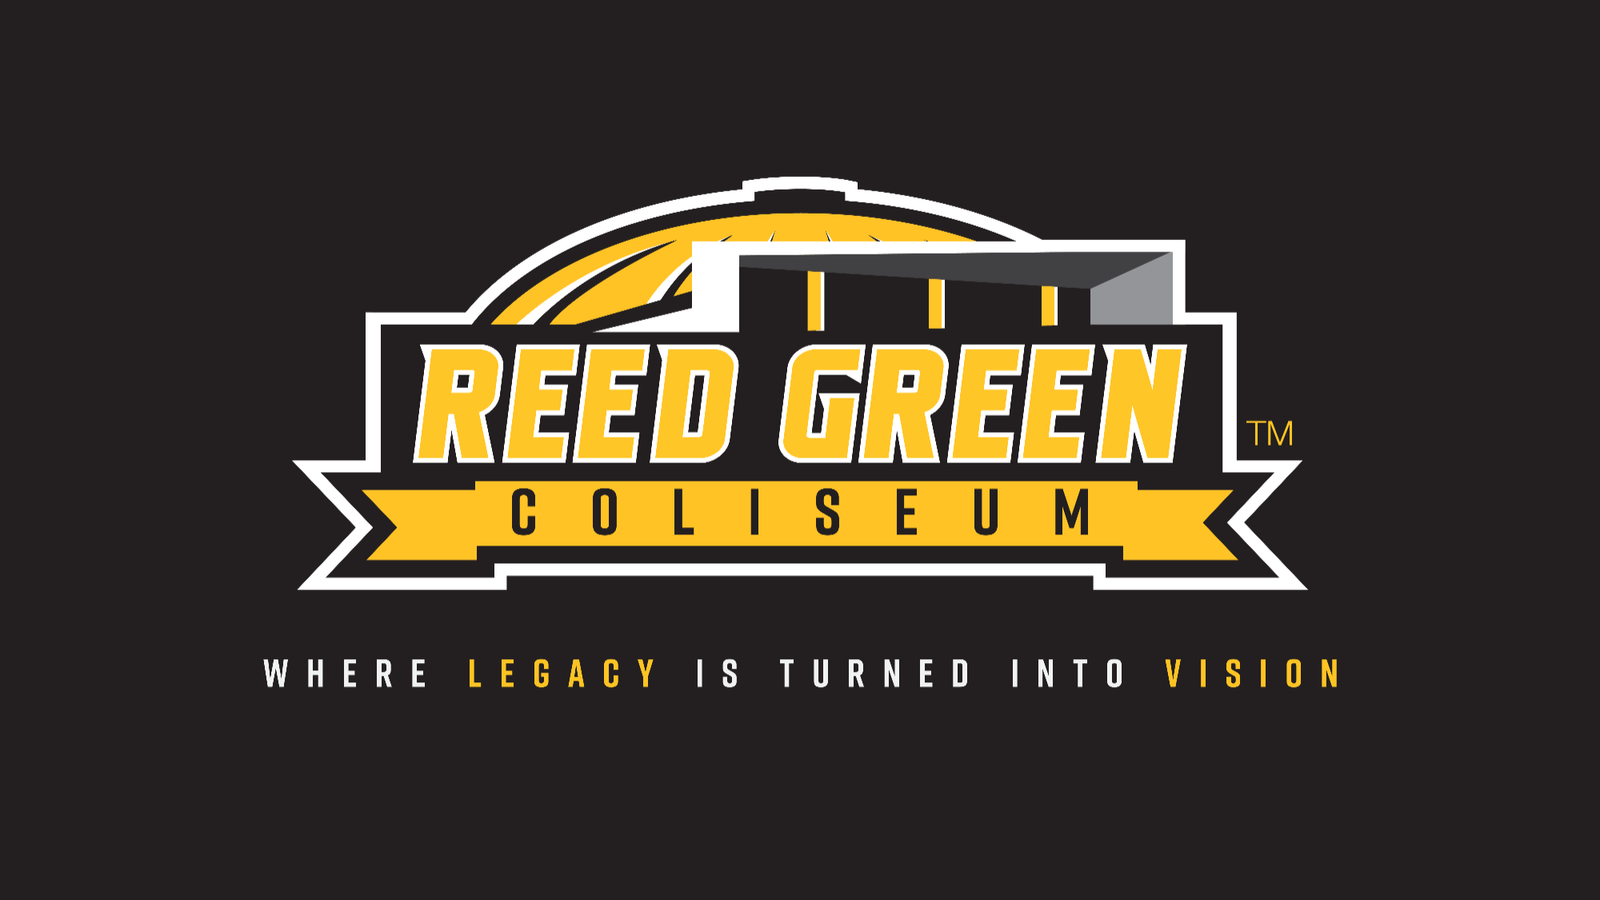 $35 Million Renovation Unveiled at Reed Green Coliseum for Southern Miss Basketball Fans & Players